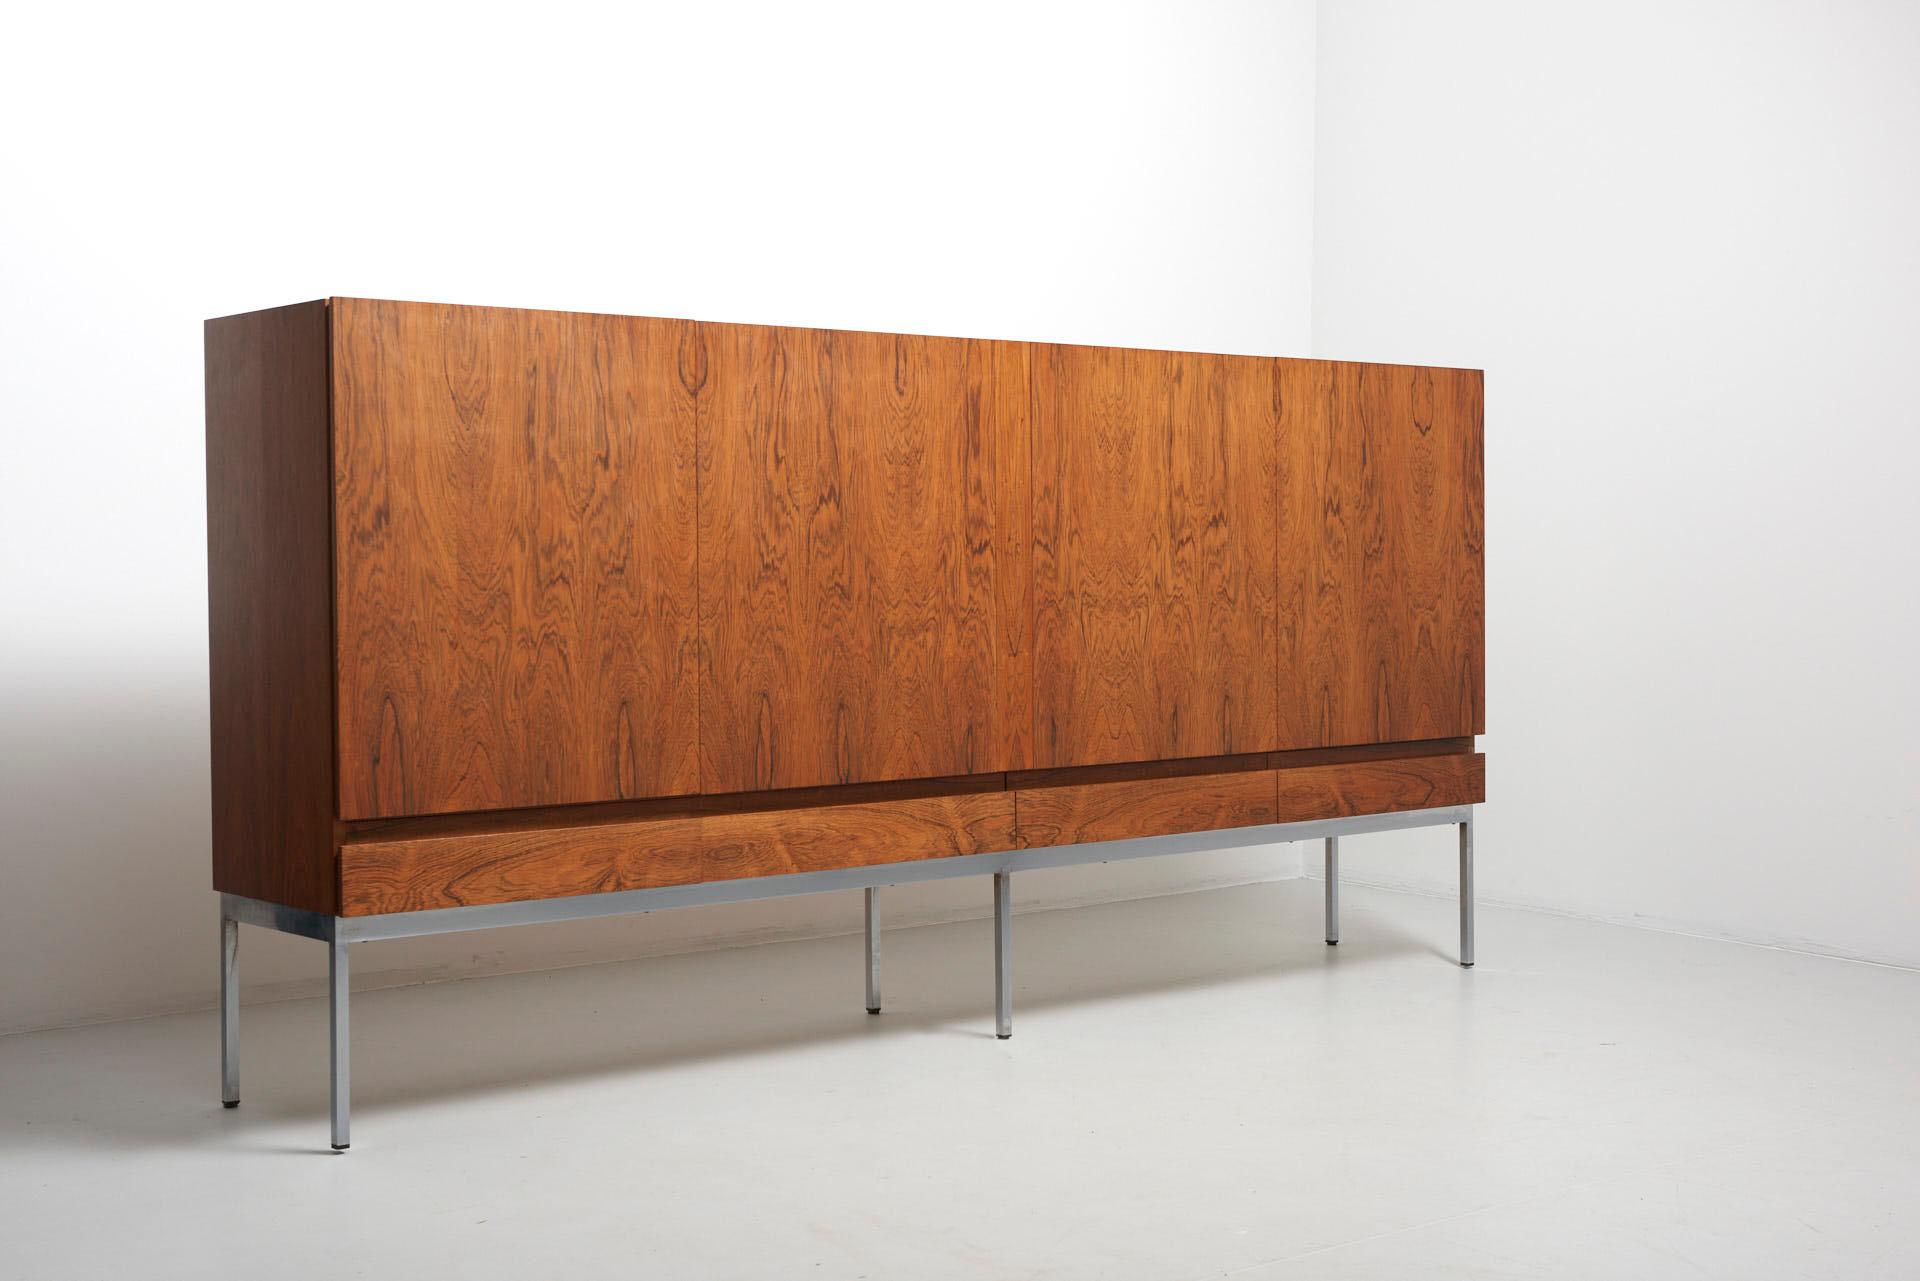 A B-60 sideboard with chromed metal base. Designed by Dieter Waeckerlin. Produced by Behr in Germany.